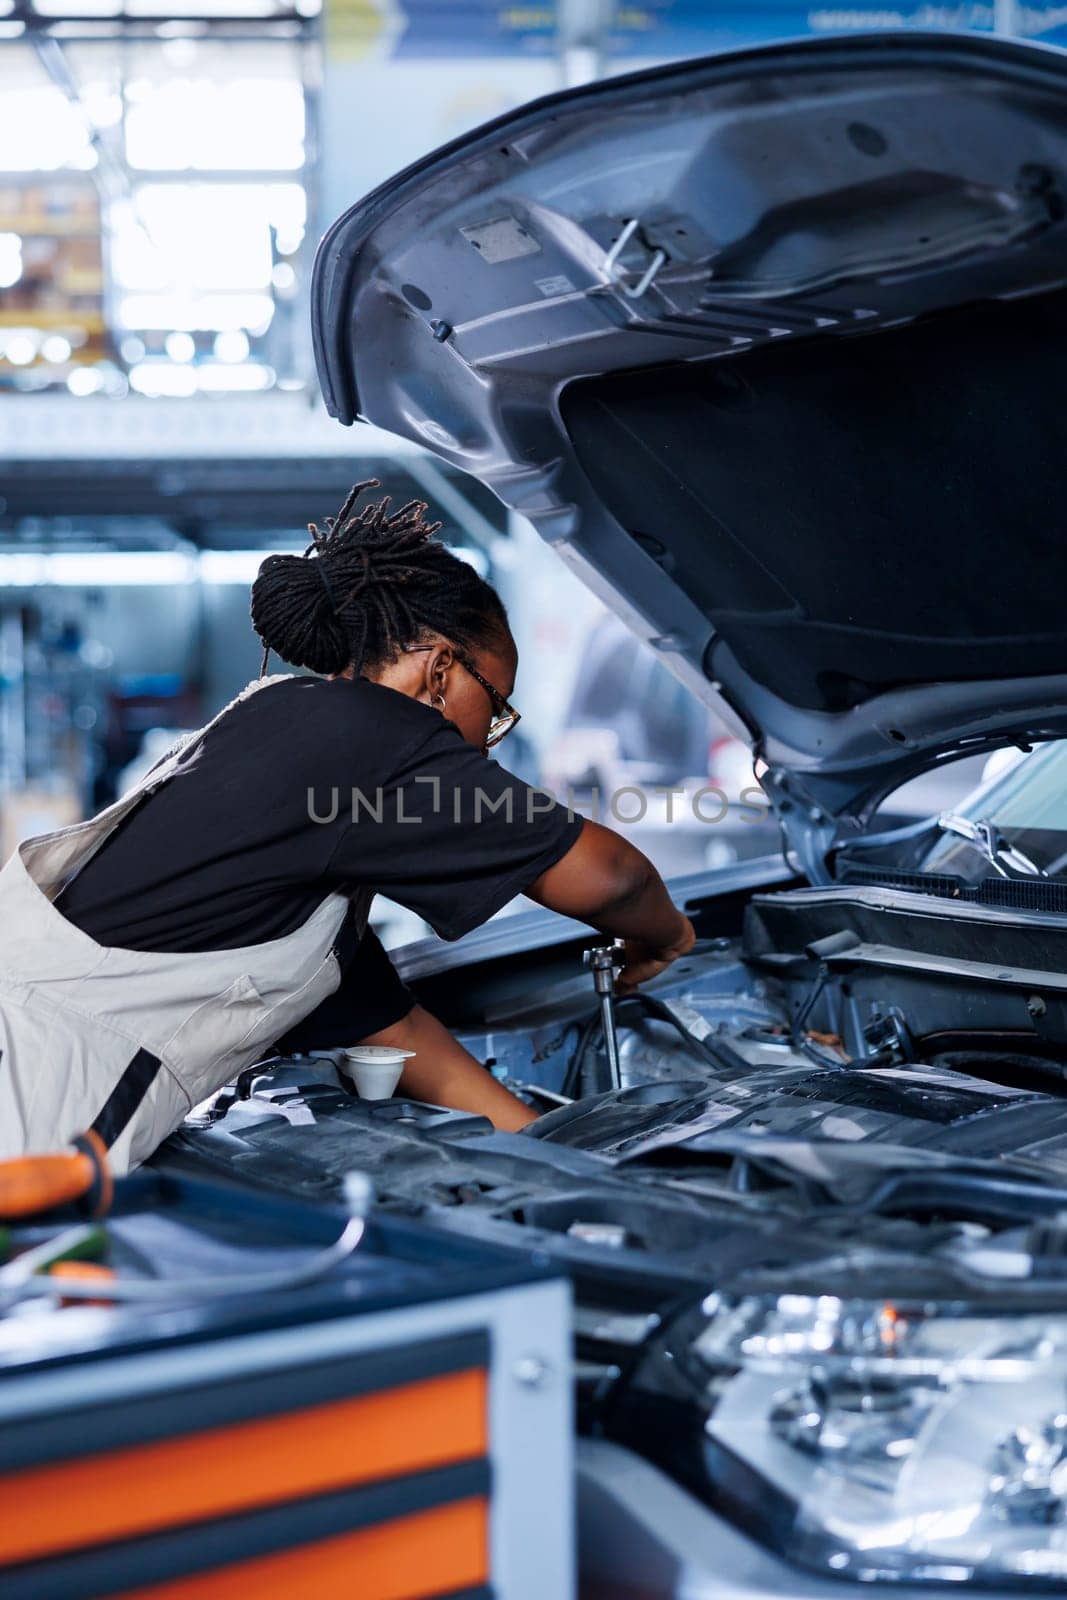 Car service technician expertly examines engine using advanced mechanical tools, ensuring flawless automotive performance and safety. African american woman in garage conducts routine vehicle checkup